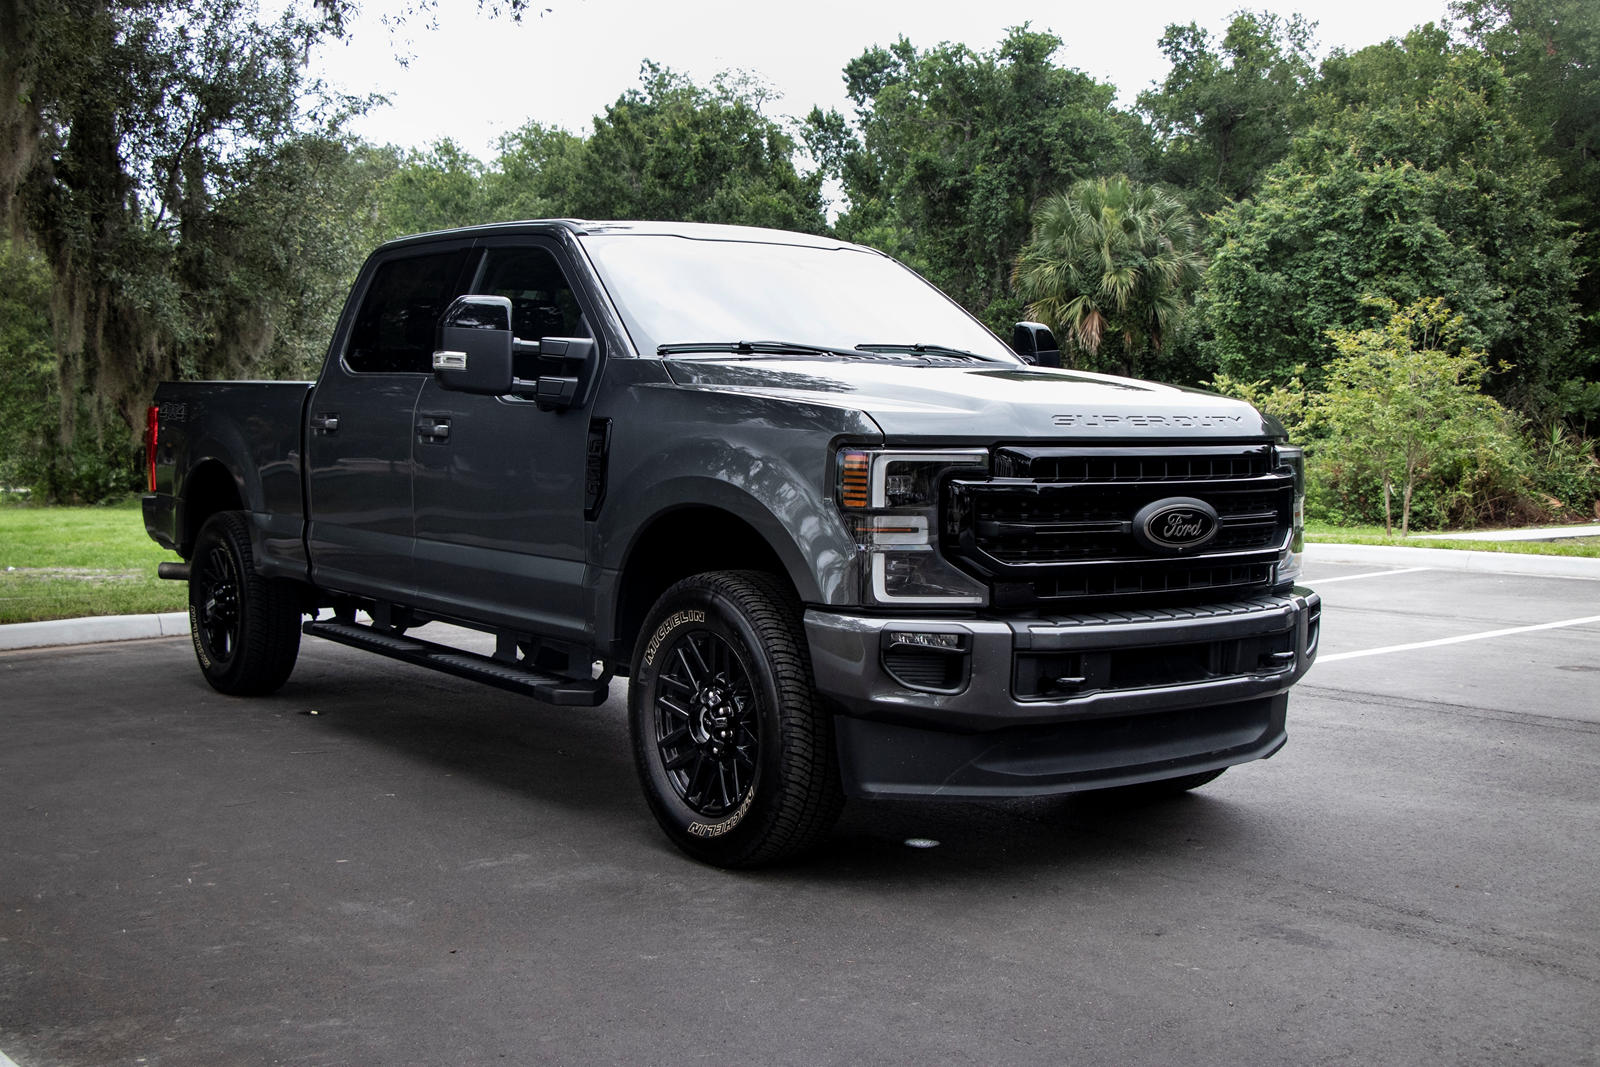 2021 Ford F250 Super Duty Review New Ford F250 Pickup Truck Price